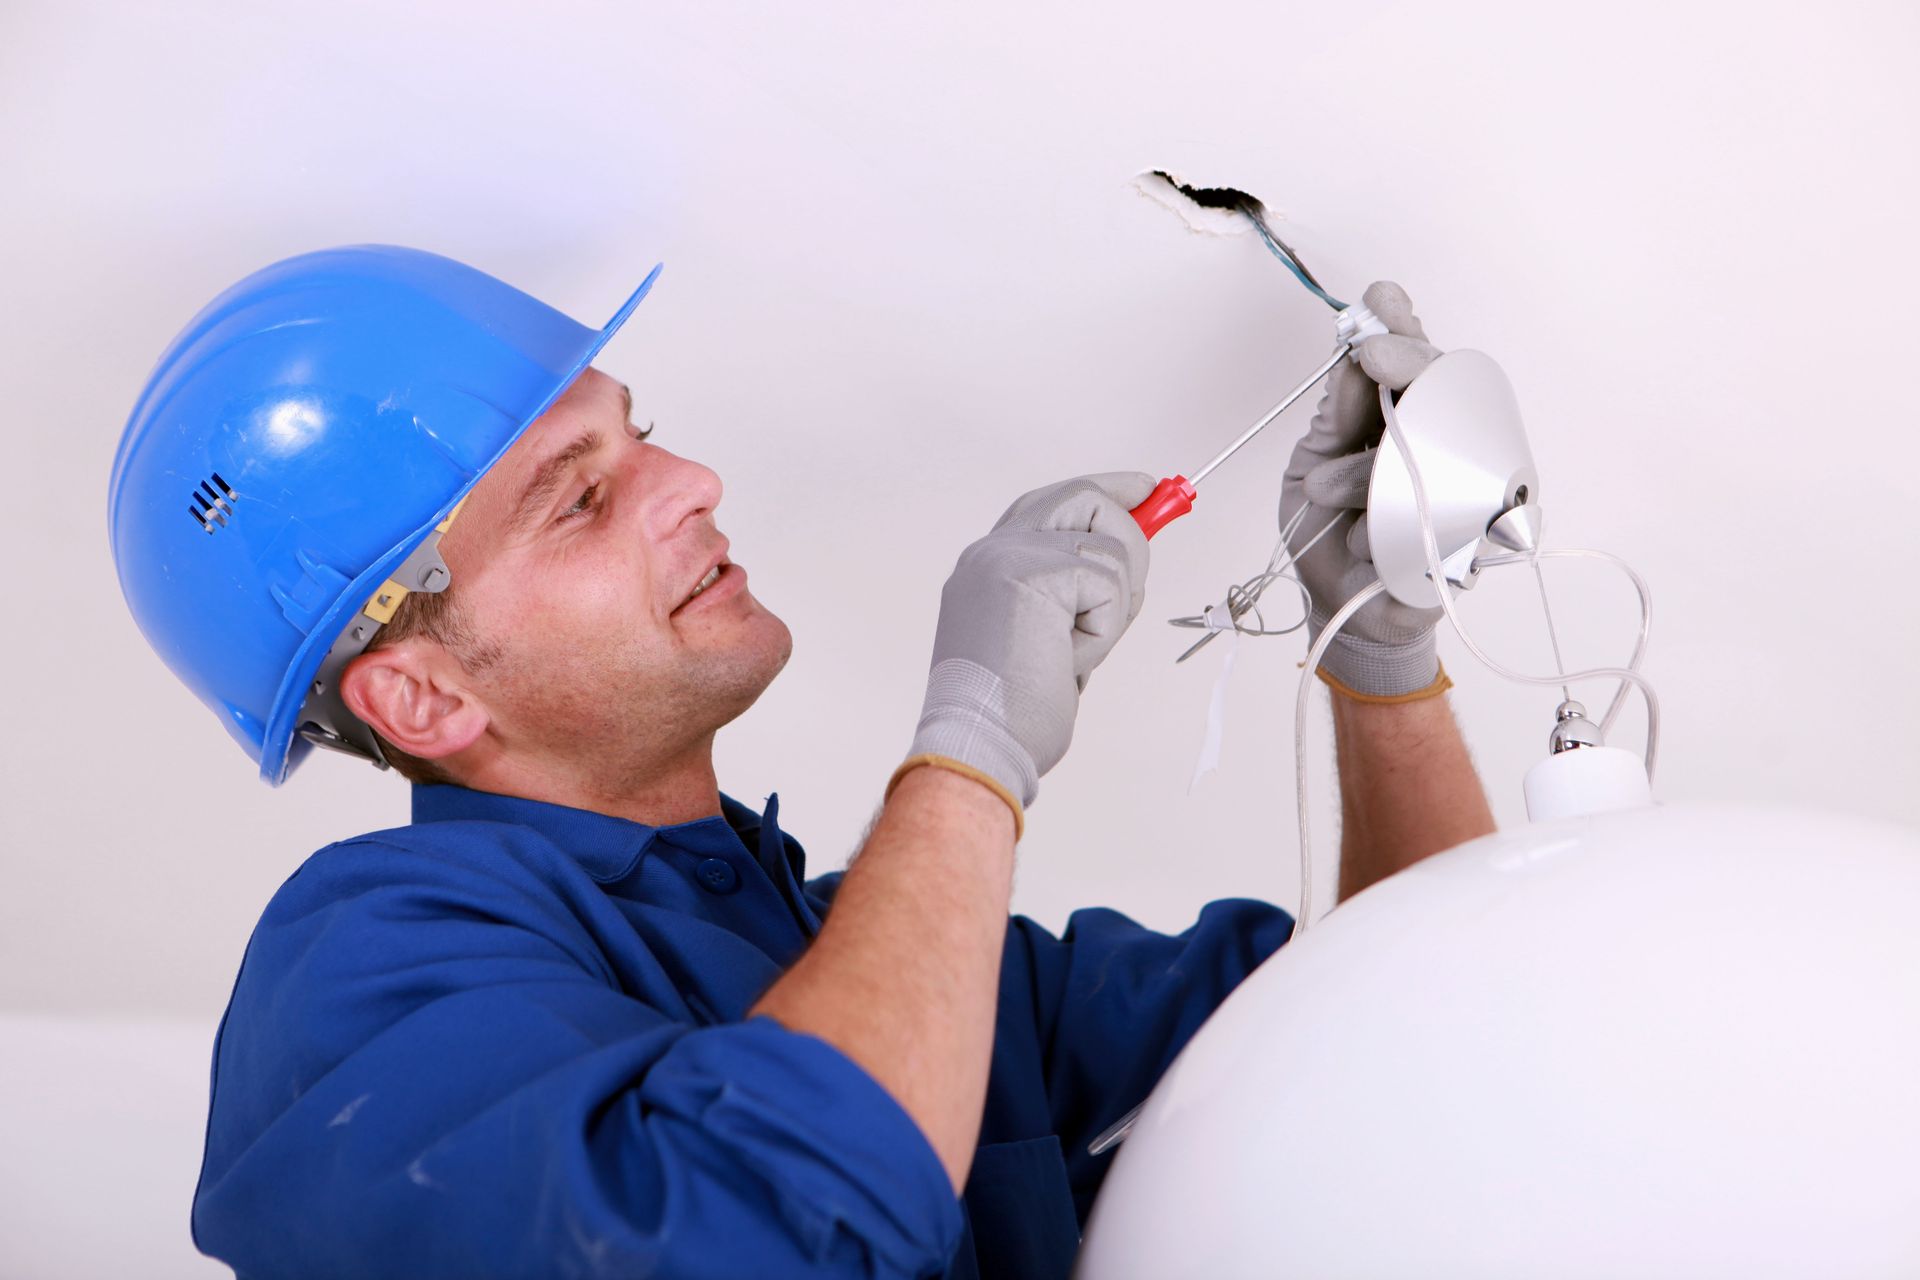 local electrical services